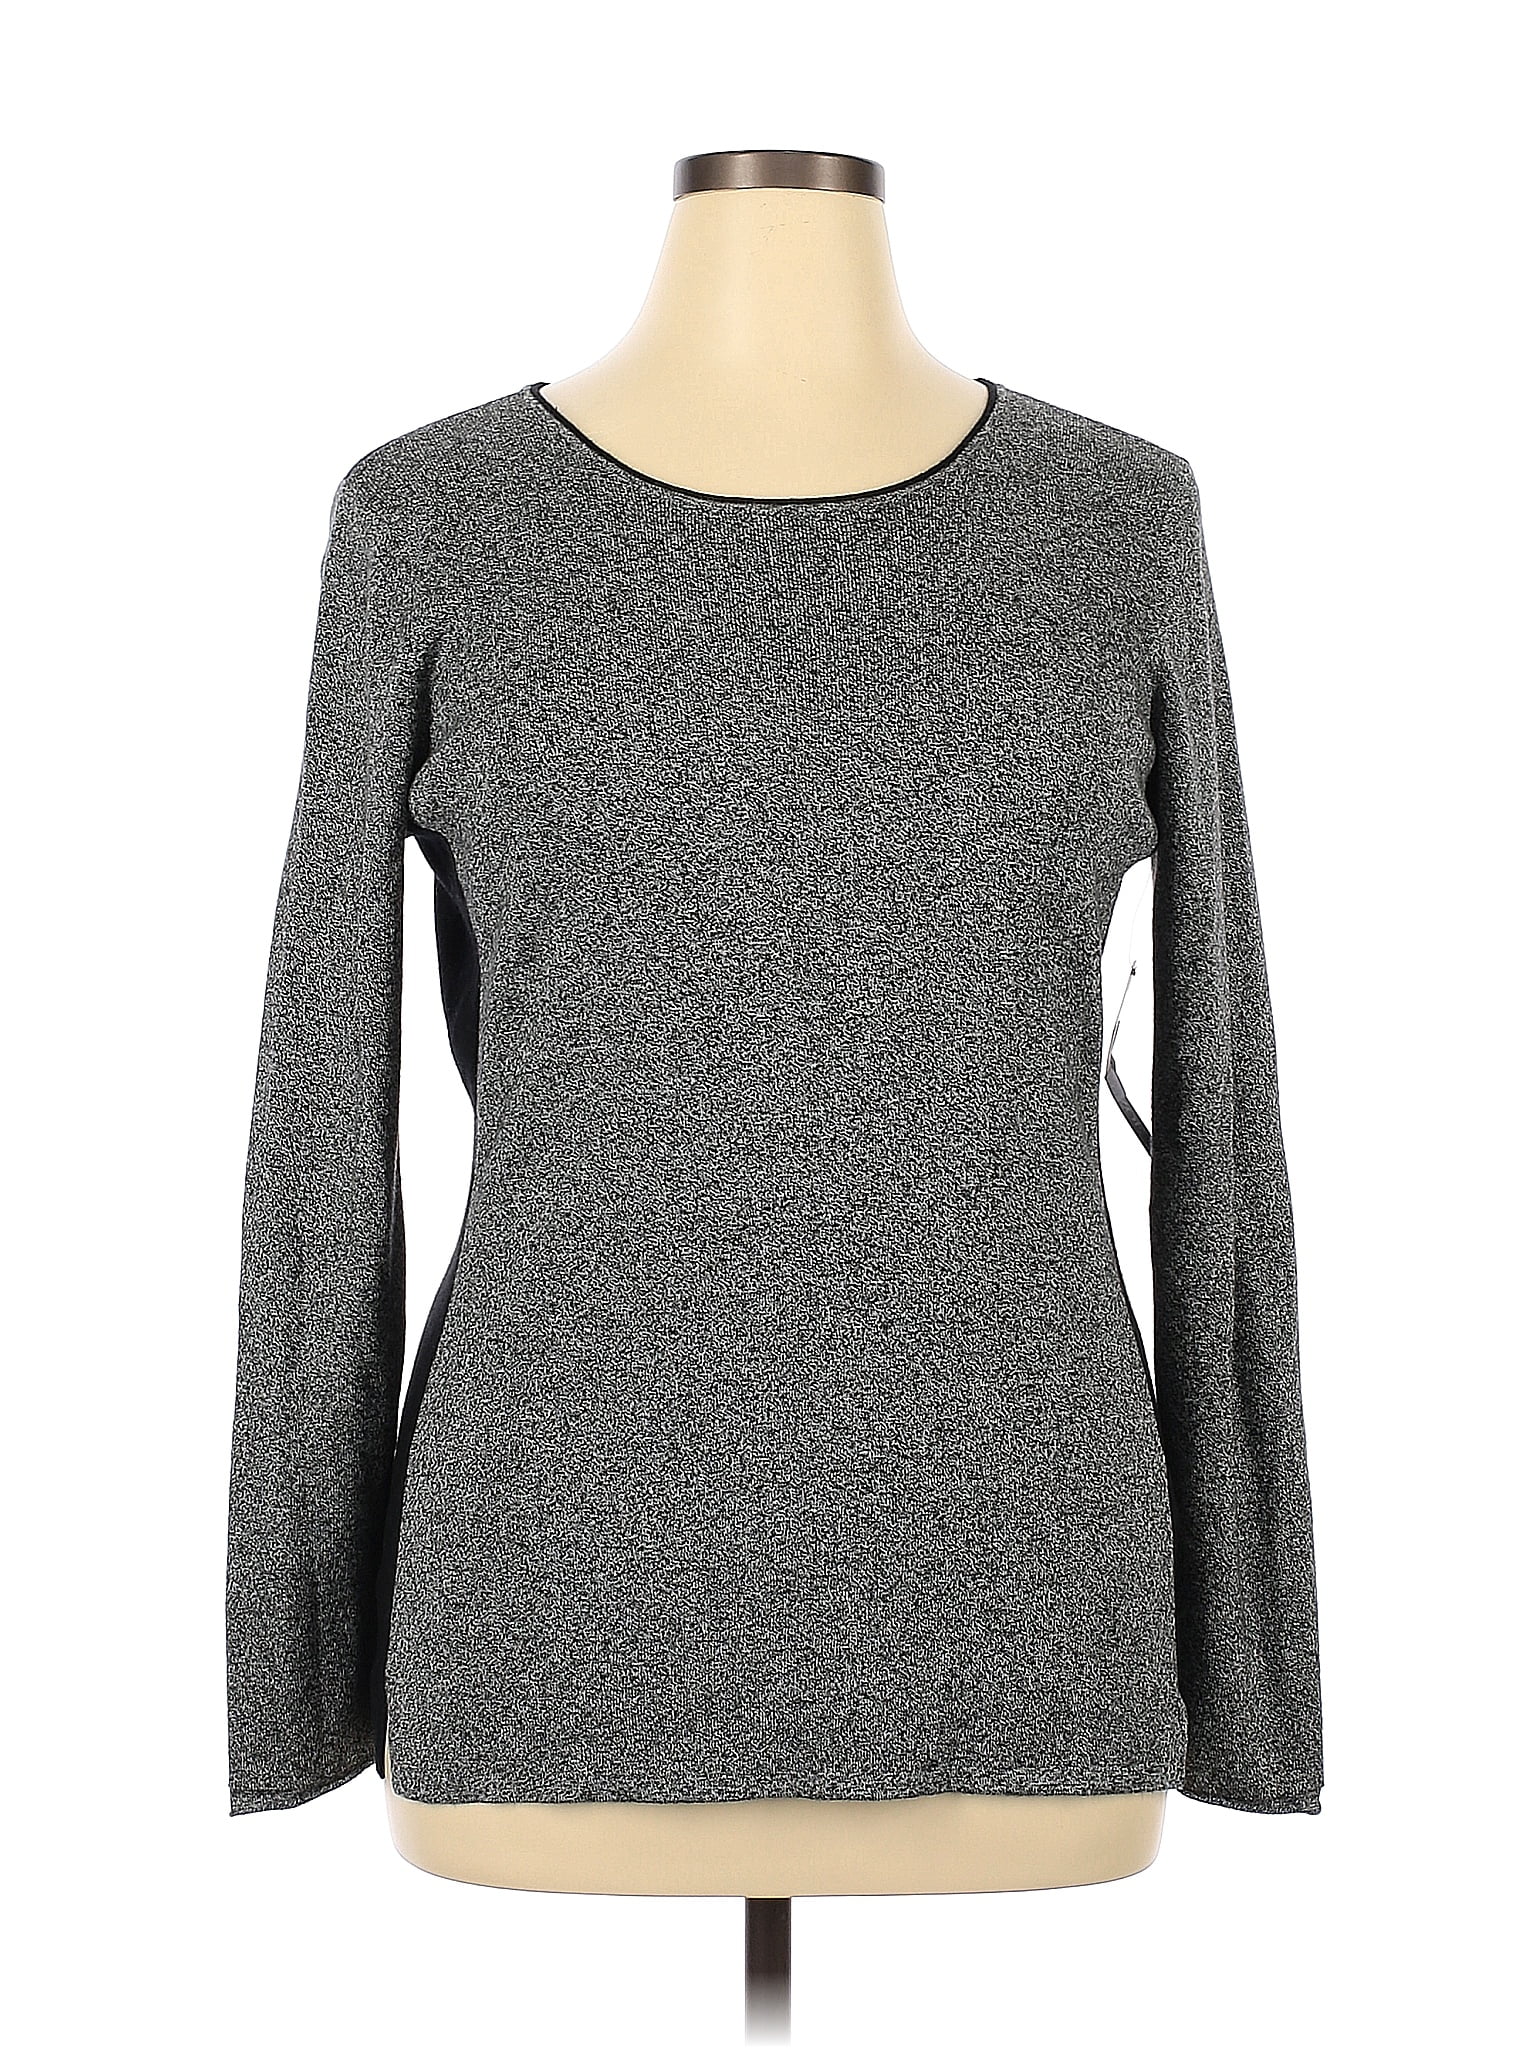 Nic + Zoe Color Block Gray Pullover Sweater Size XL - 77% off | thredUP